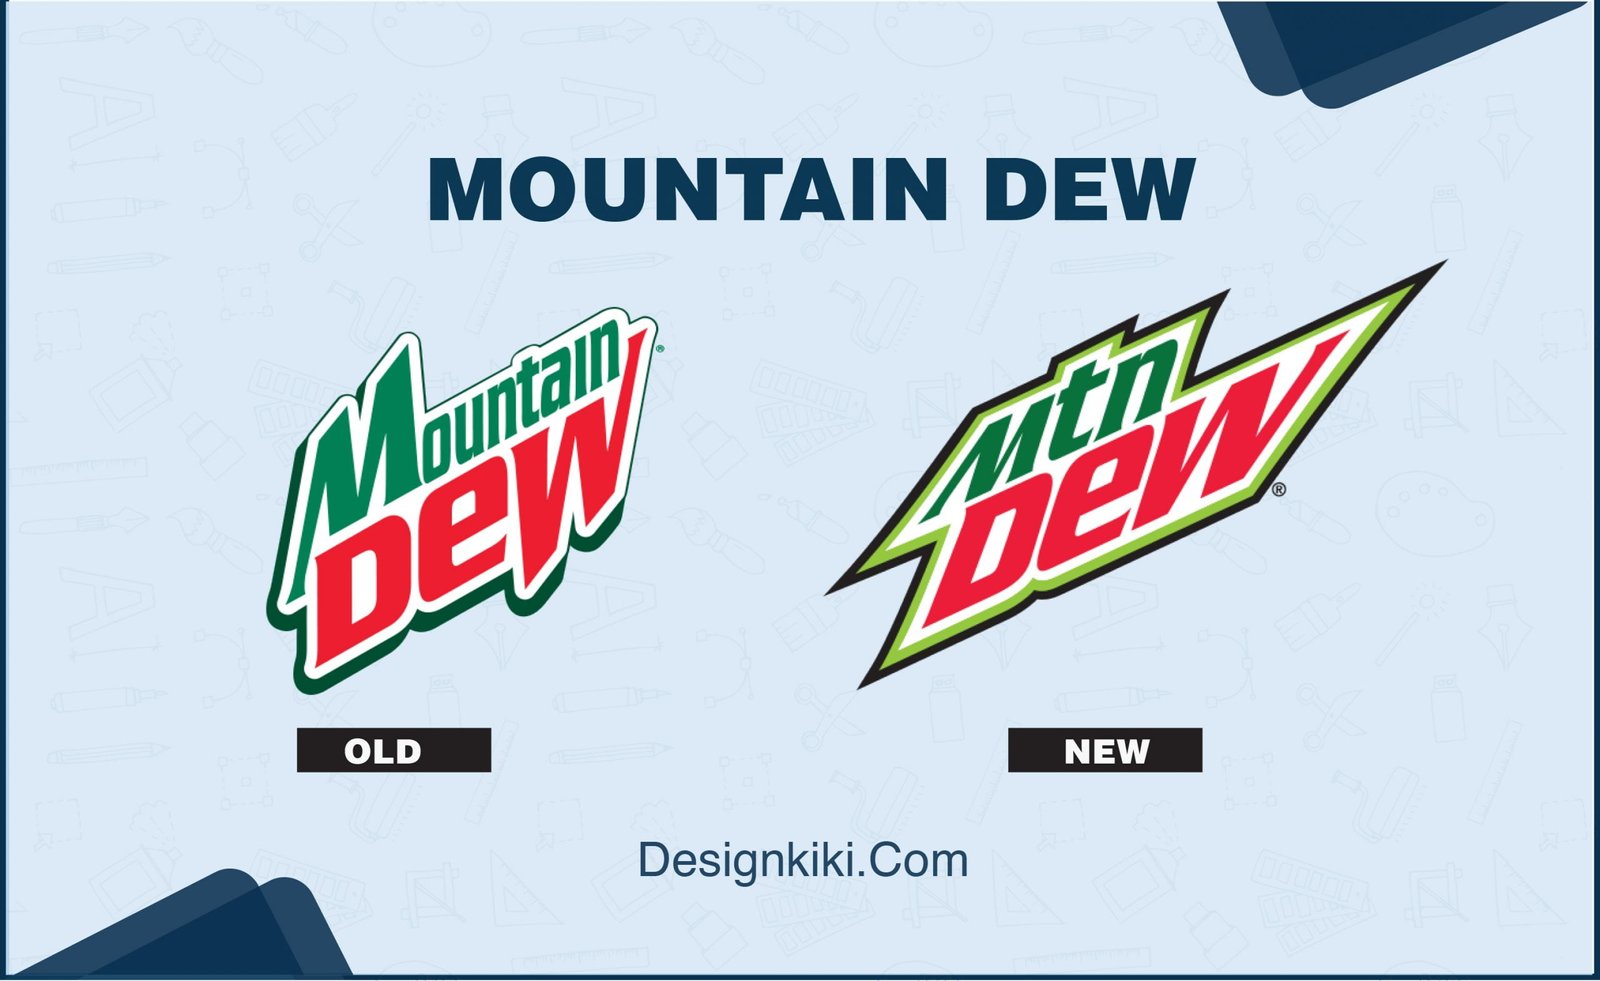 Mountain Dew logo before and after redesign